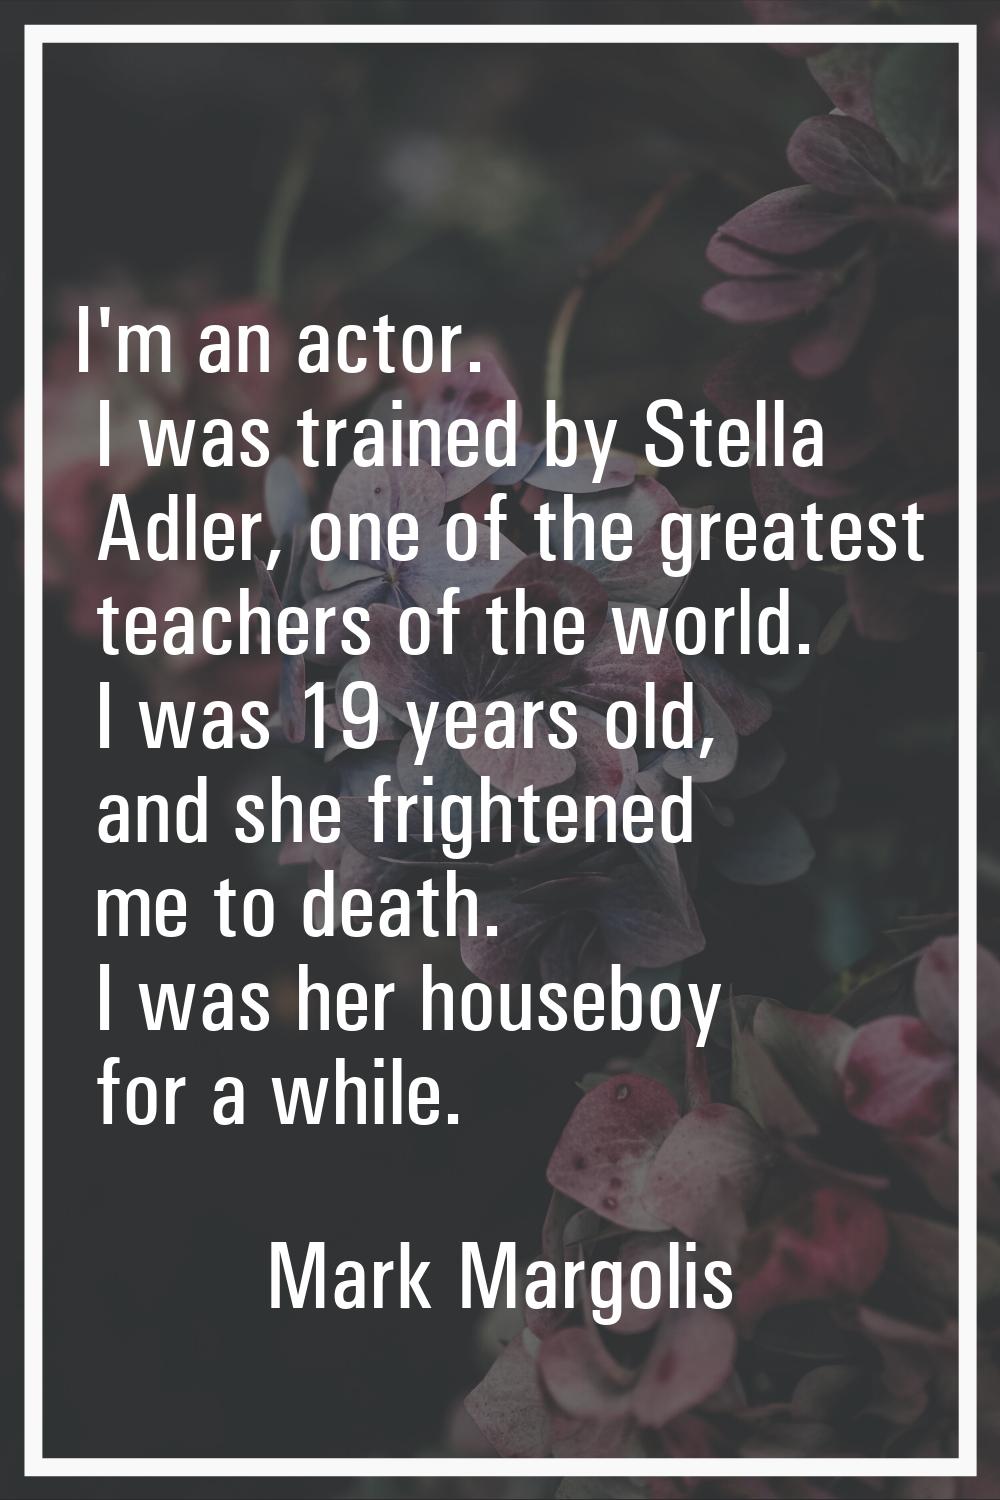 I'm an actor. I was trained by Stella Adler, one of the greatest teachers of the world. I was 19 ye